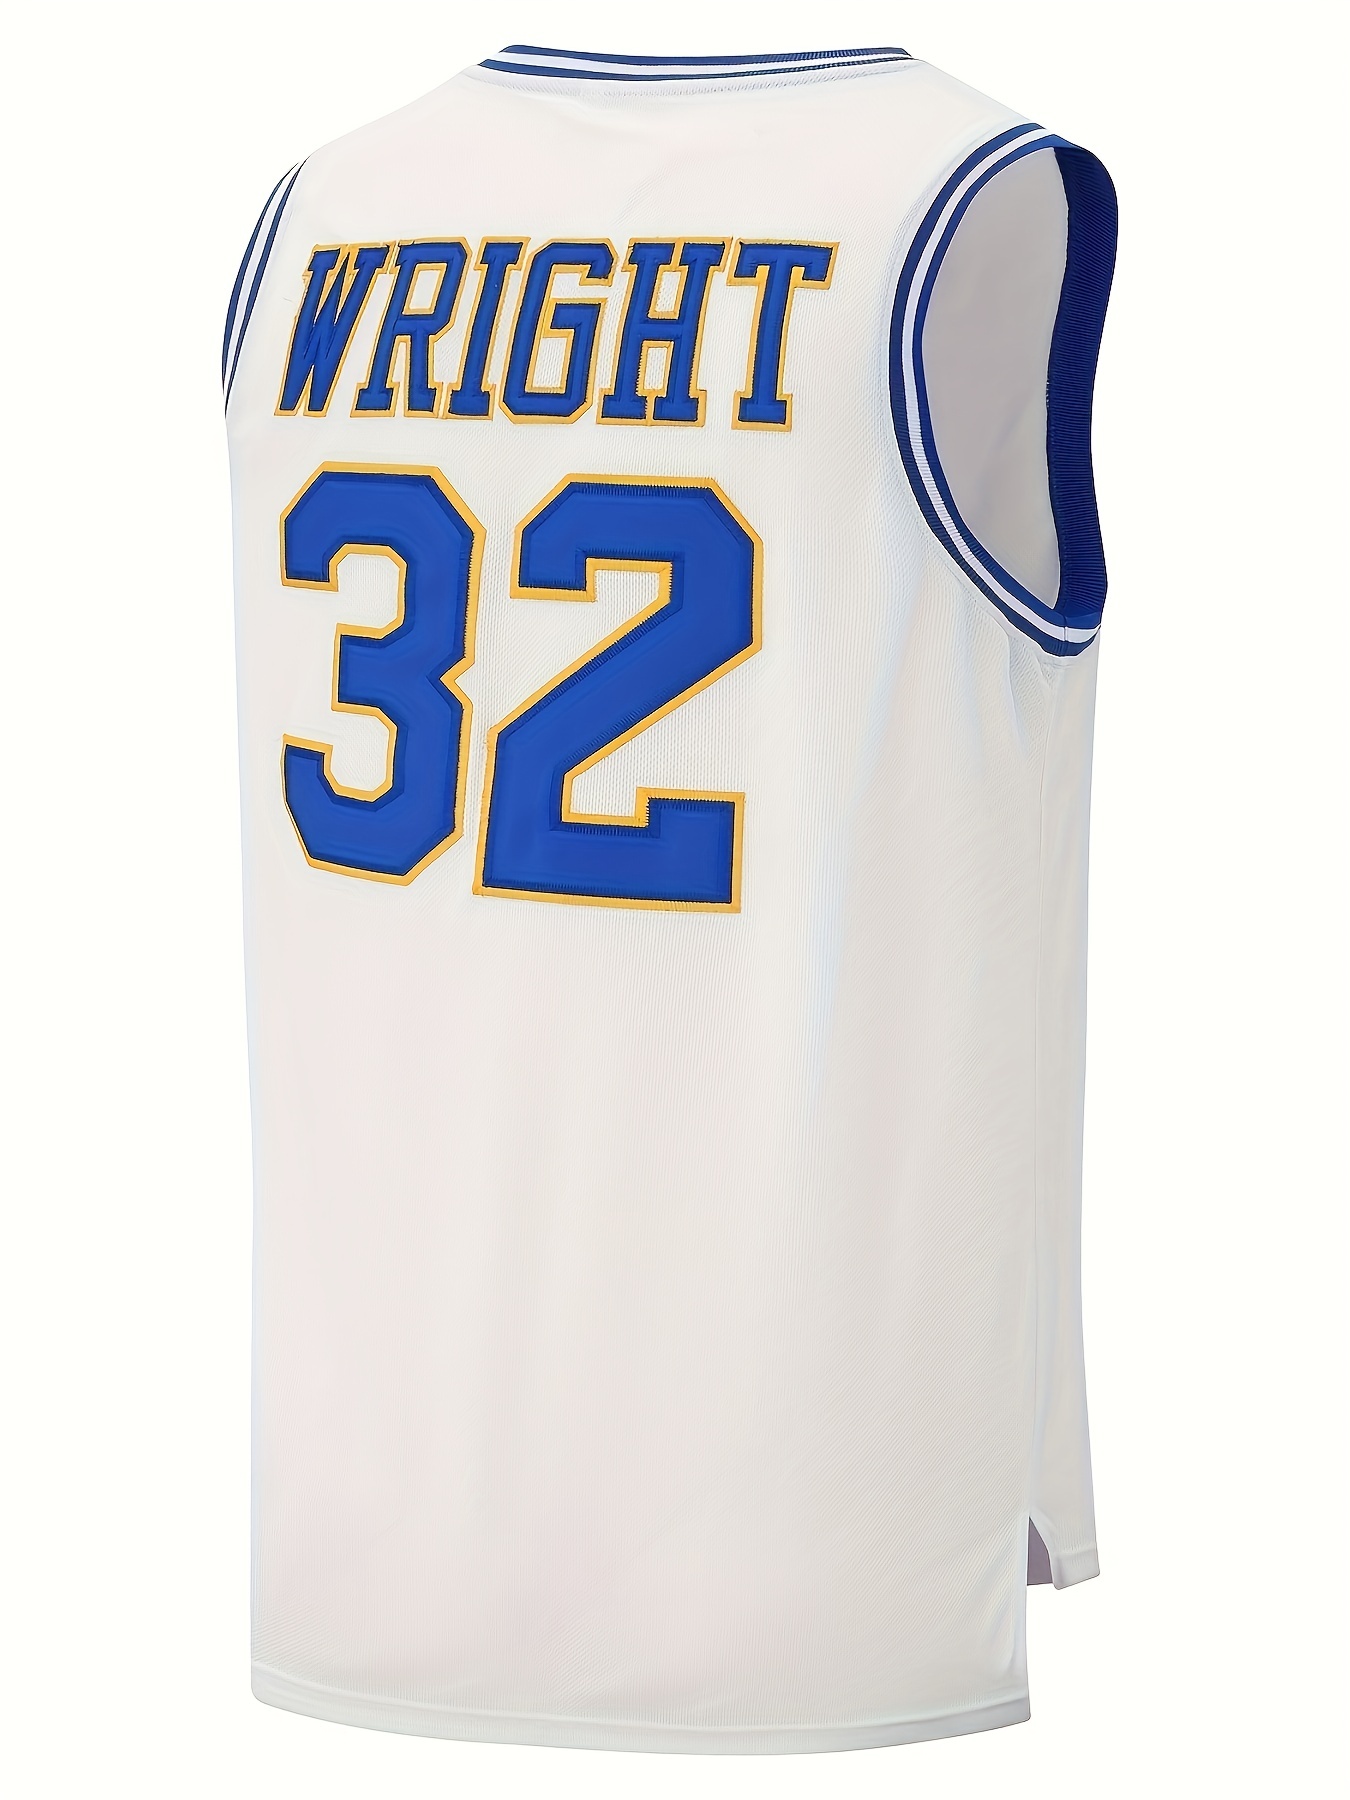  McCall #22 Wright #32 Love and Basketball Moive Crenshaw Basketball  Jersey (#22 Blue, Small) : Sports & Outdoors